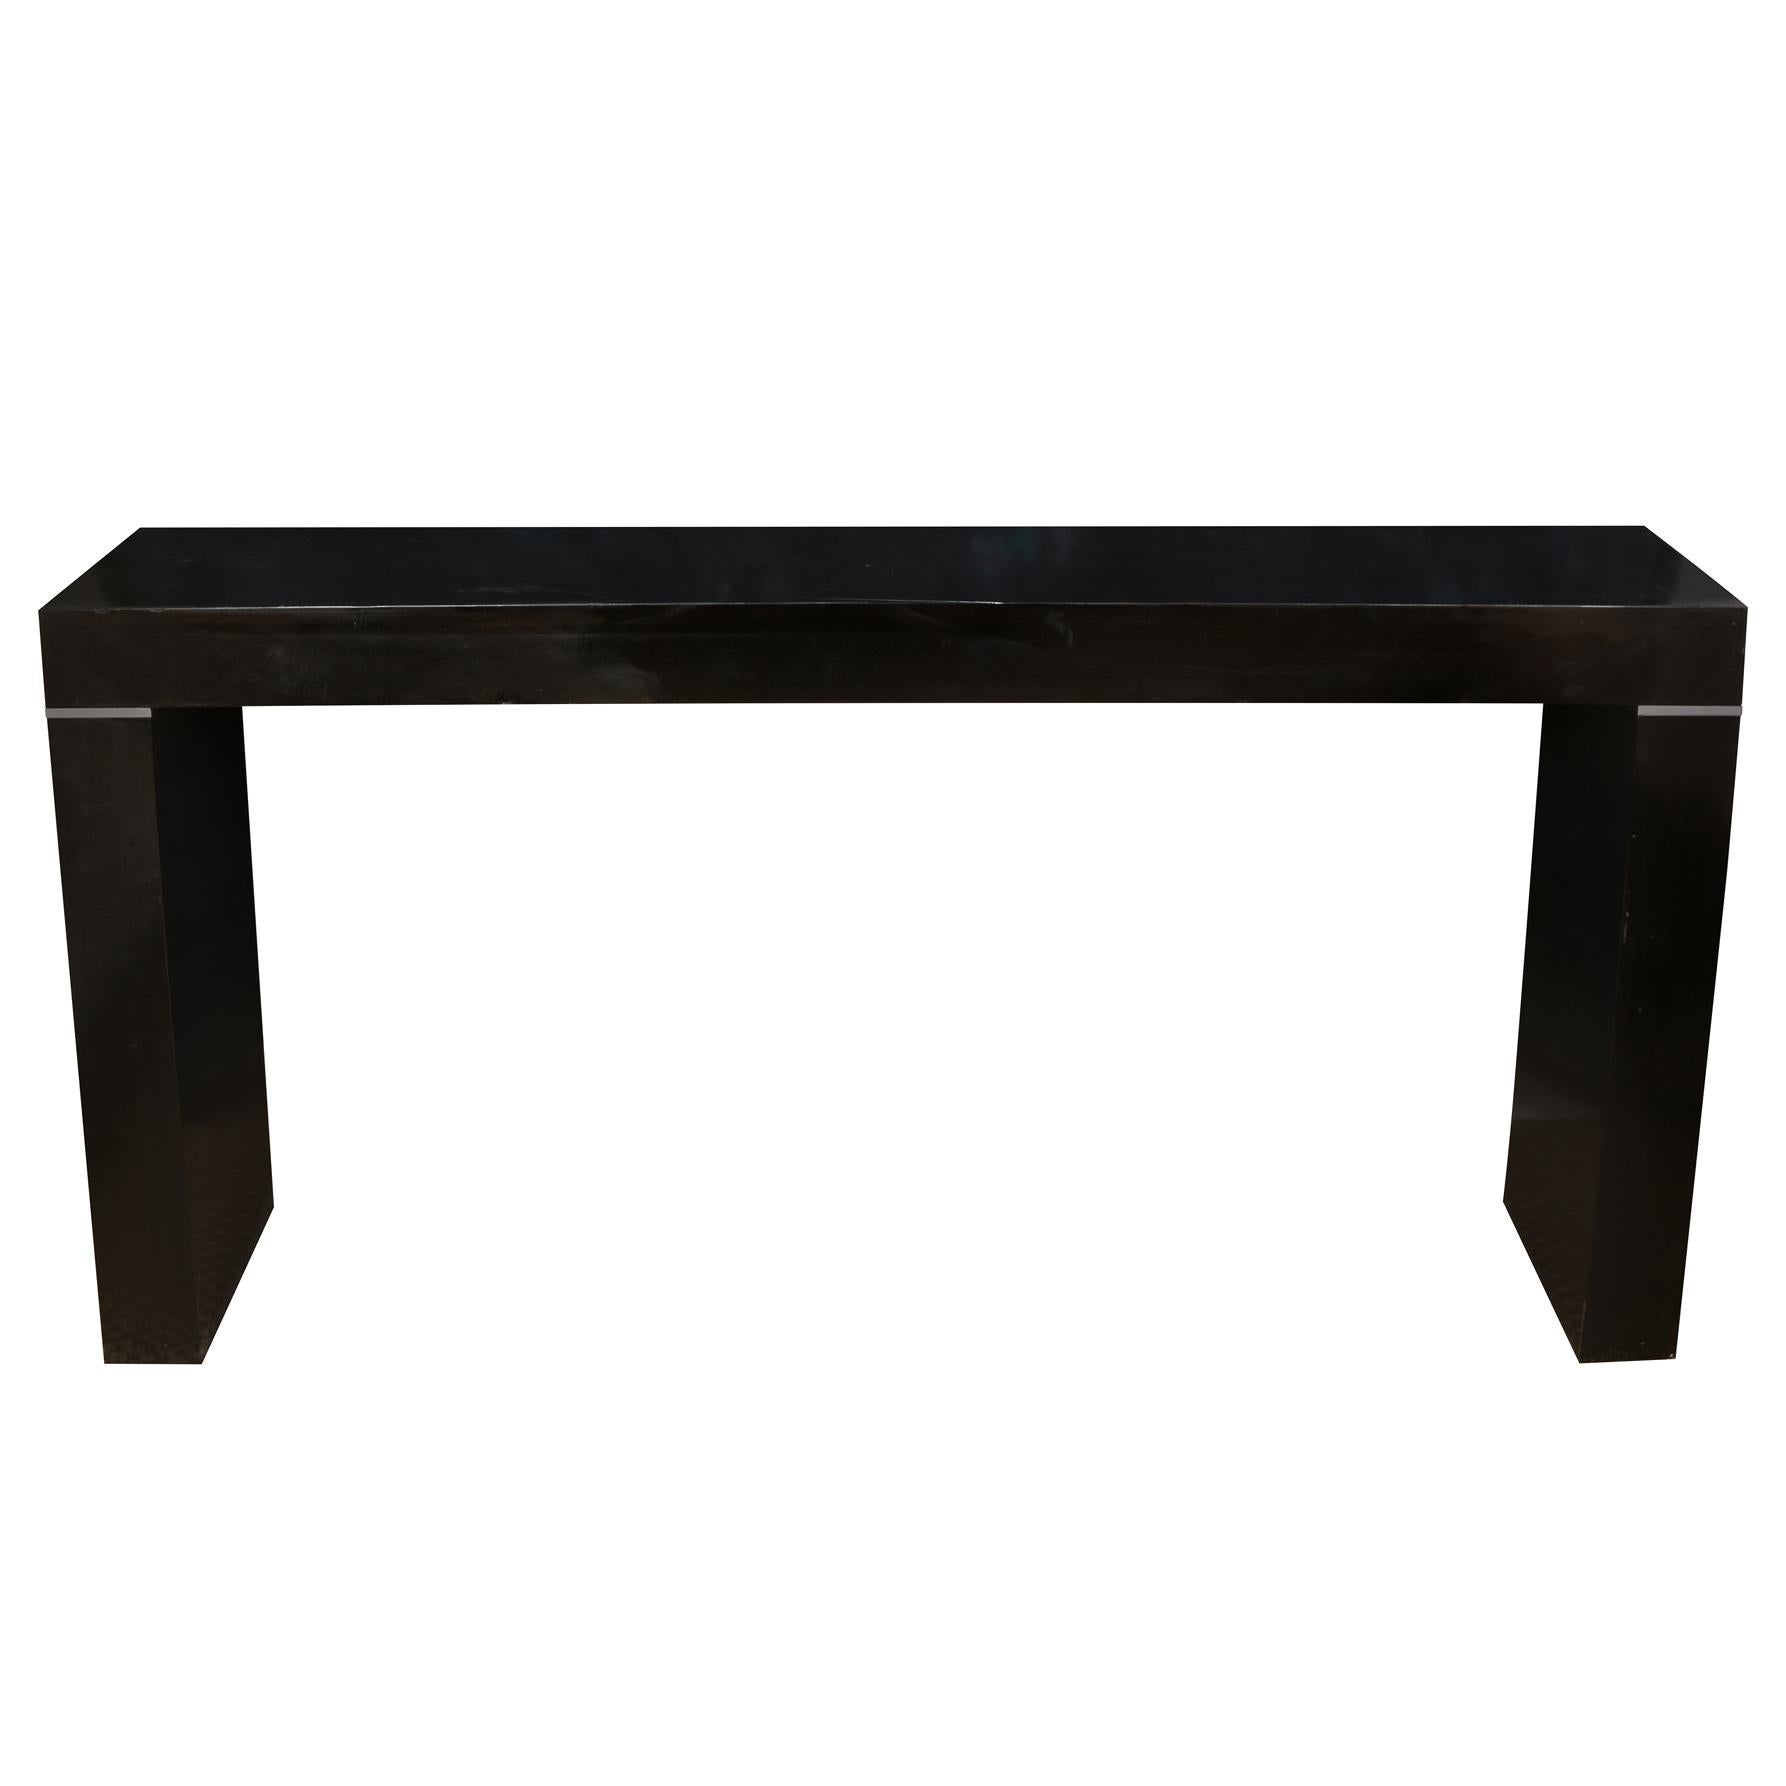 A pair of modern design, sleek Vaughan Benz console tables in black gloss, with silver trim.